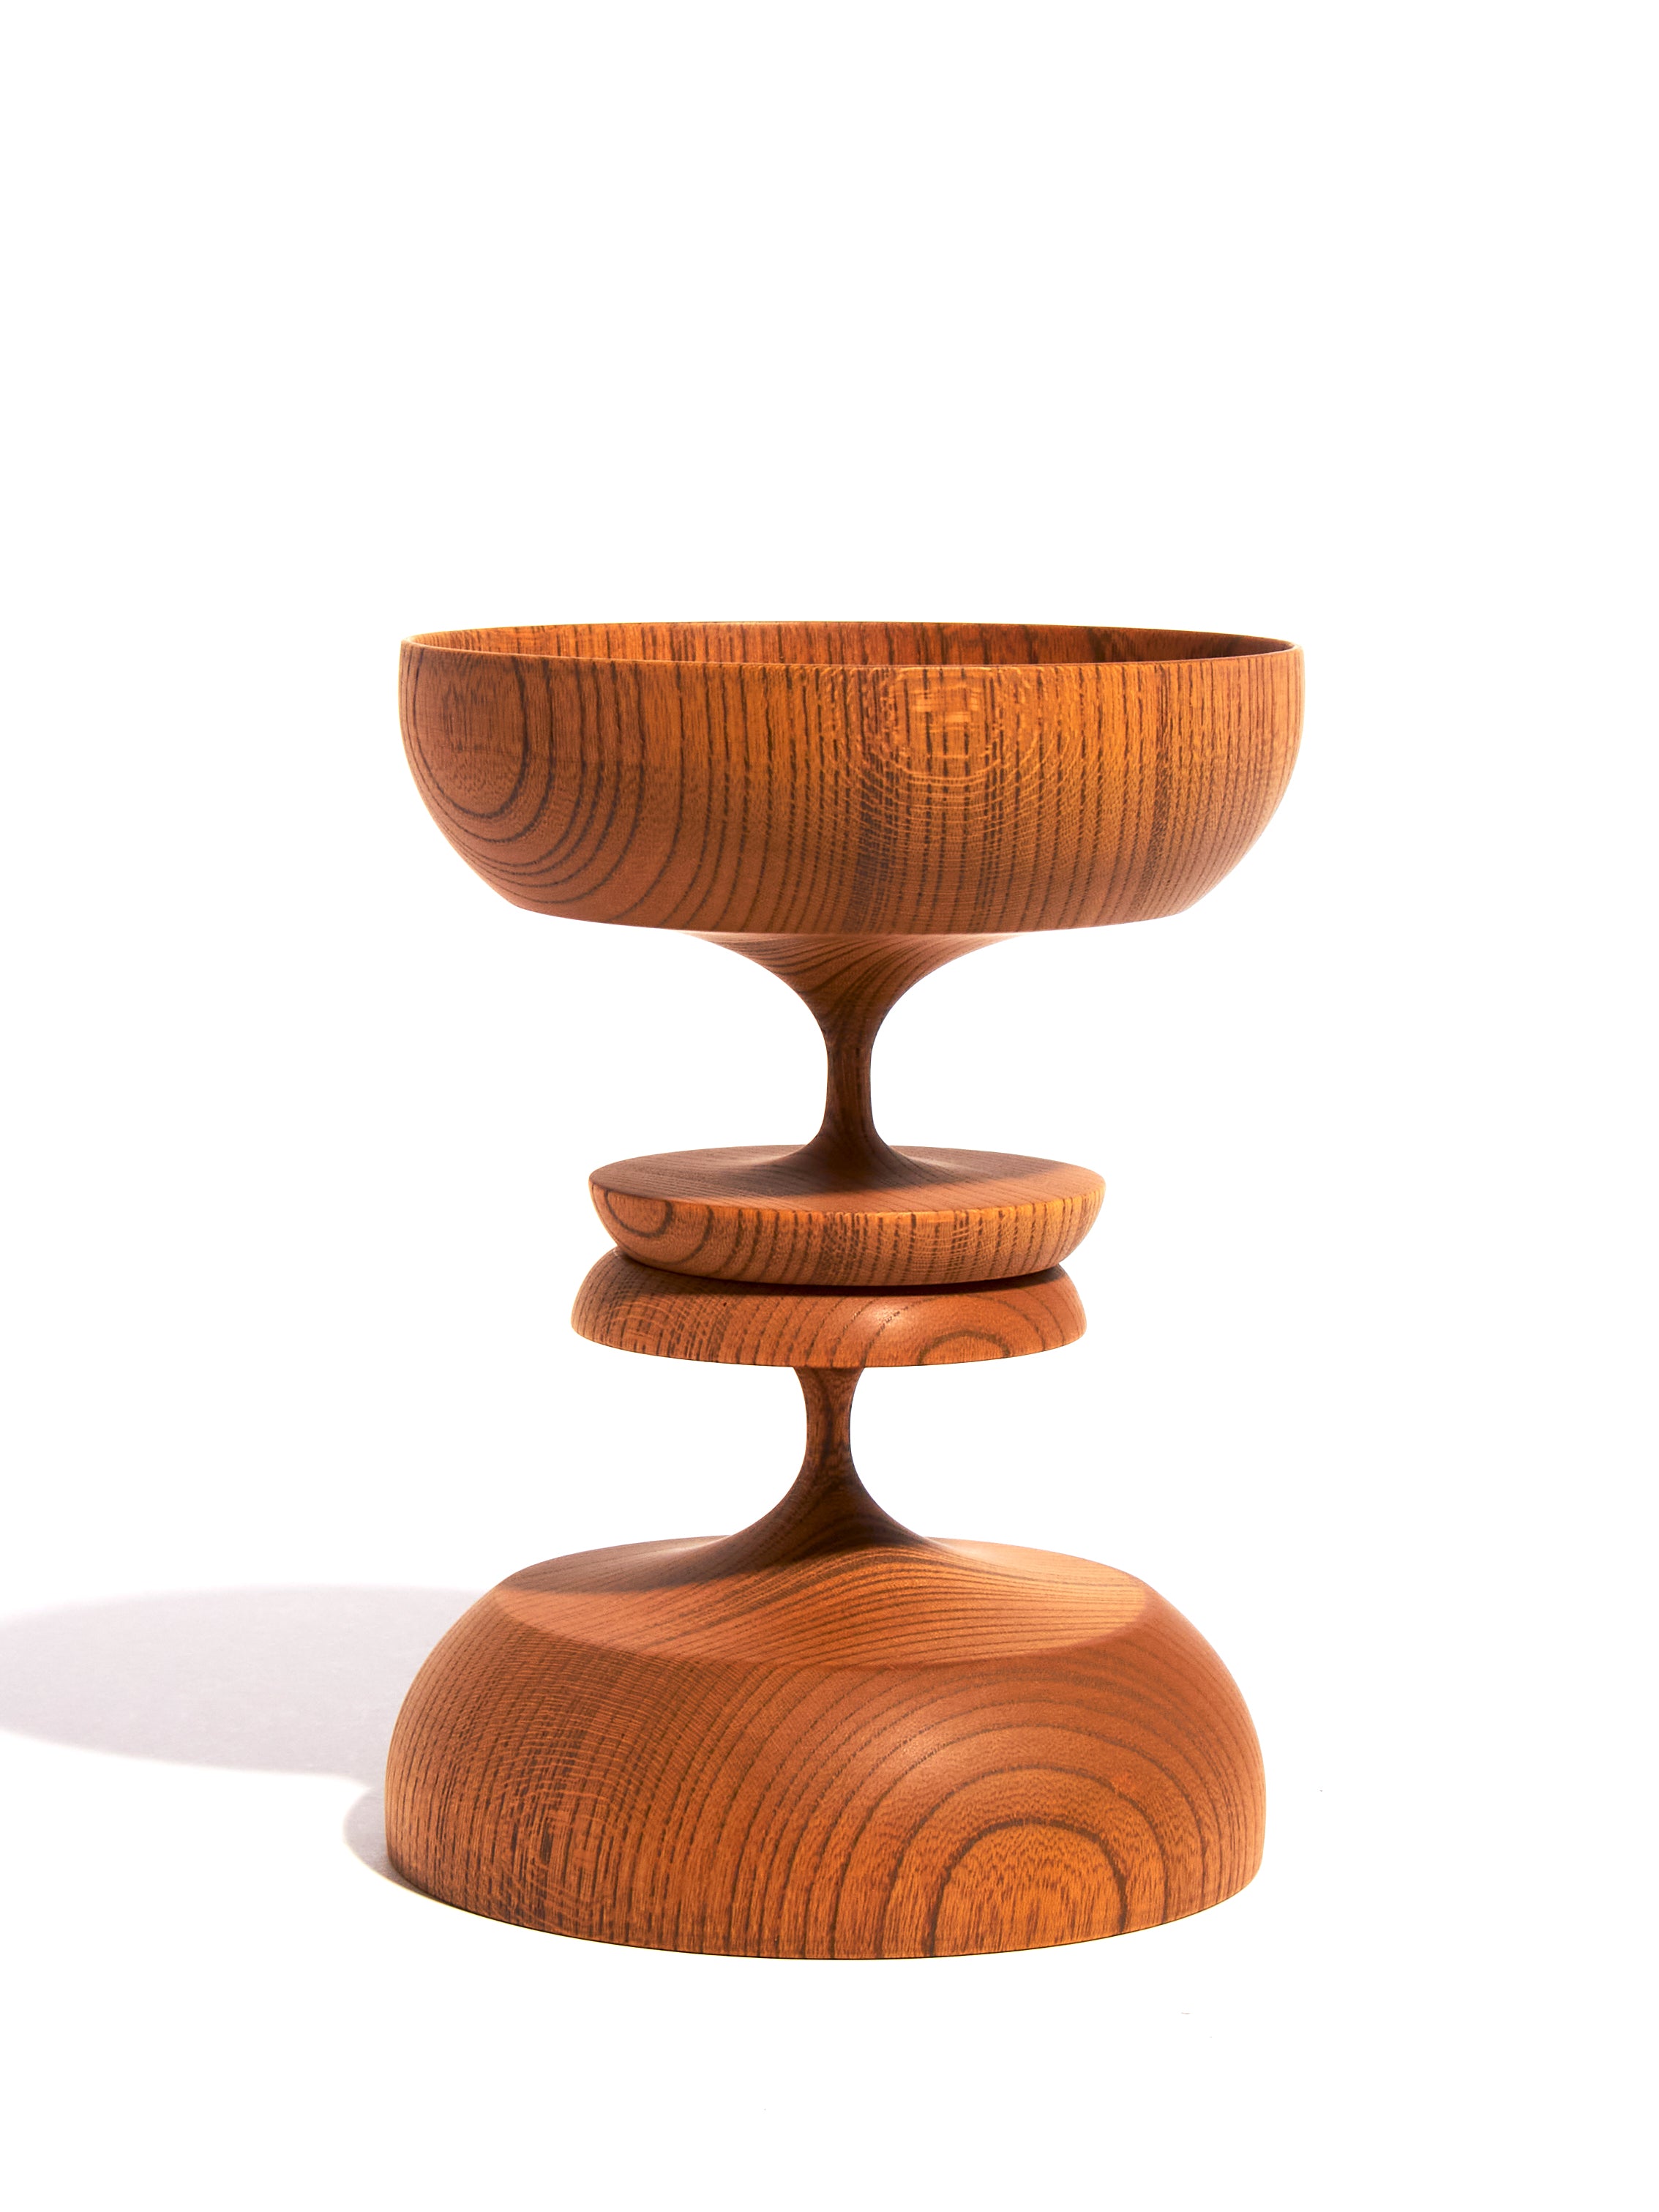 WINTER SALE 15% OFF - SINAFU HAND CARVED WOOD BOWLS